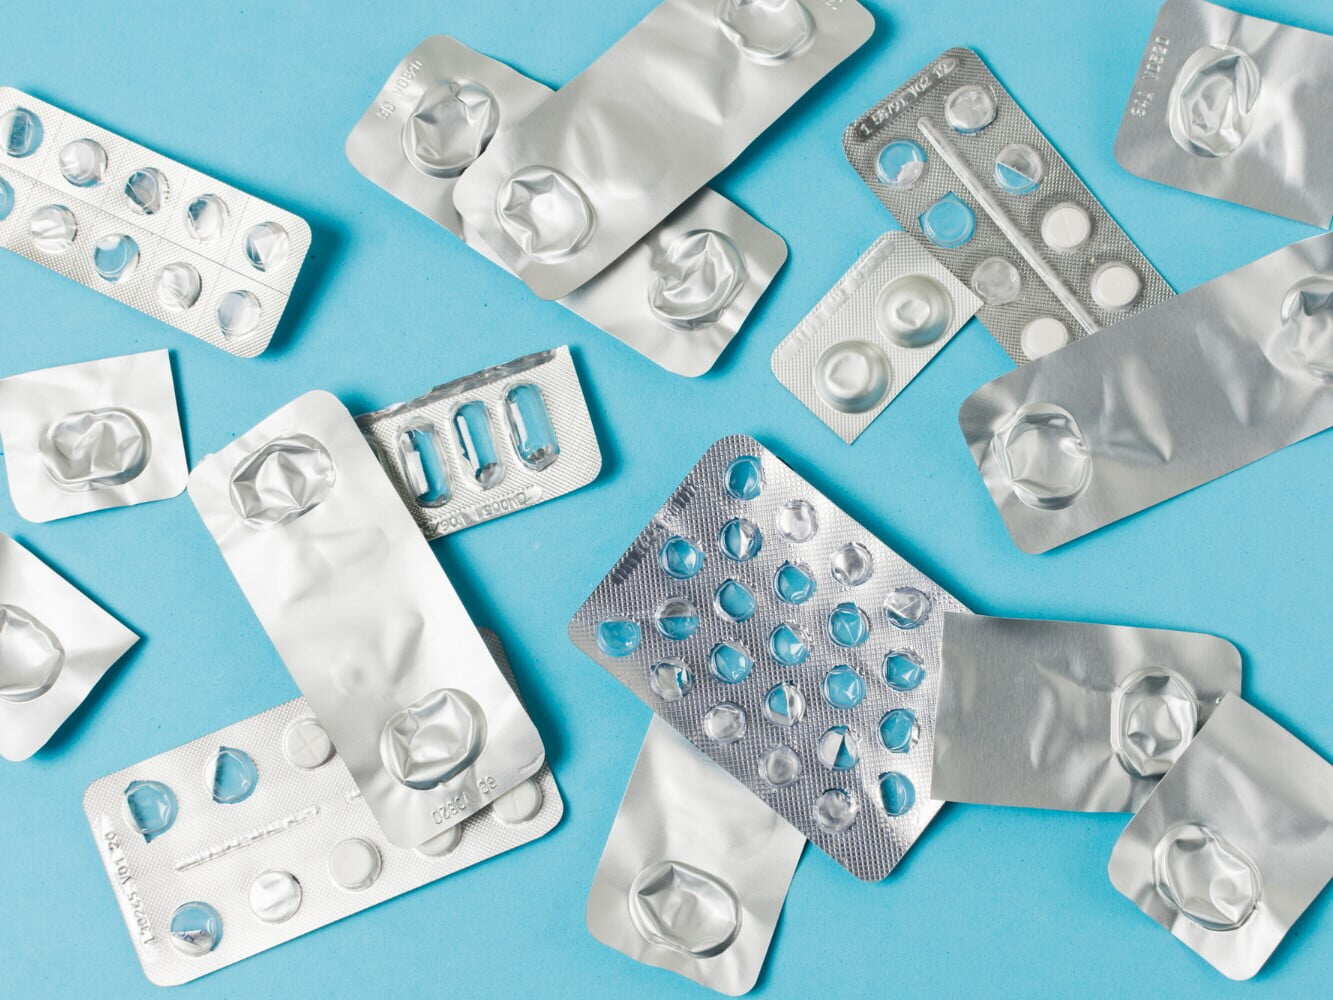 Advantages of Blister Packaging Over Strip Packaging - Medicine-On-Time